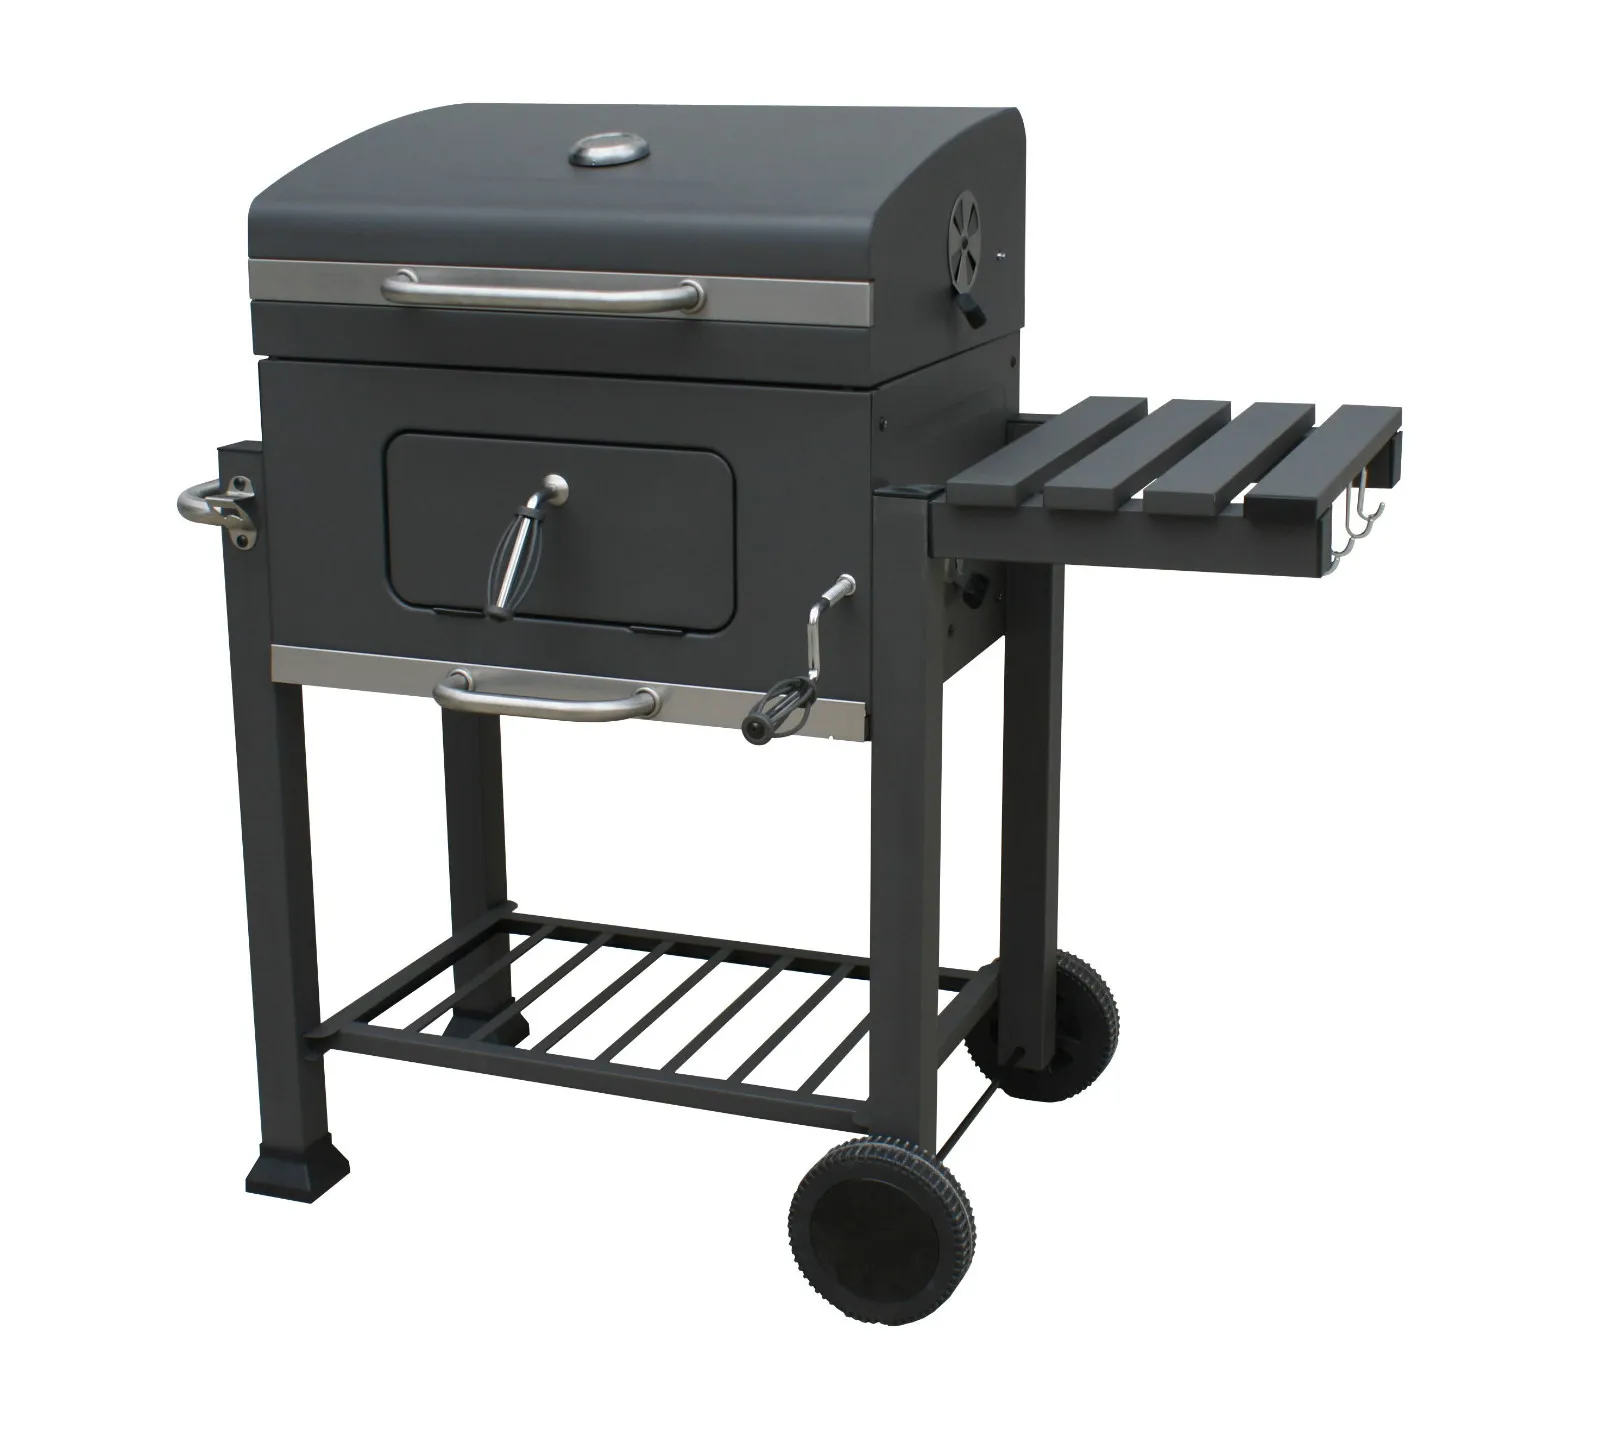 BBQ Holzkohlegrill Barbecue Smoker Grill Grillwagen